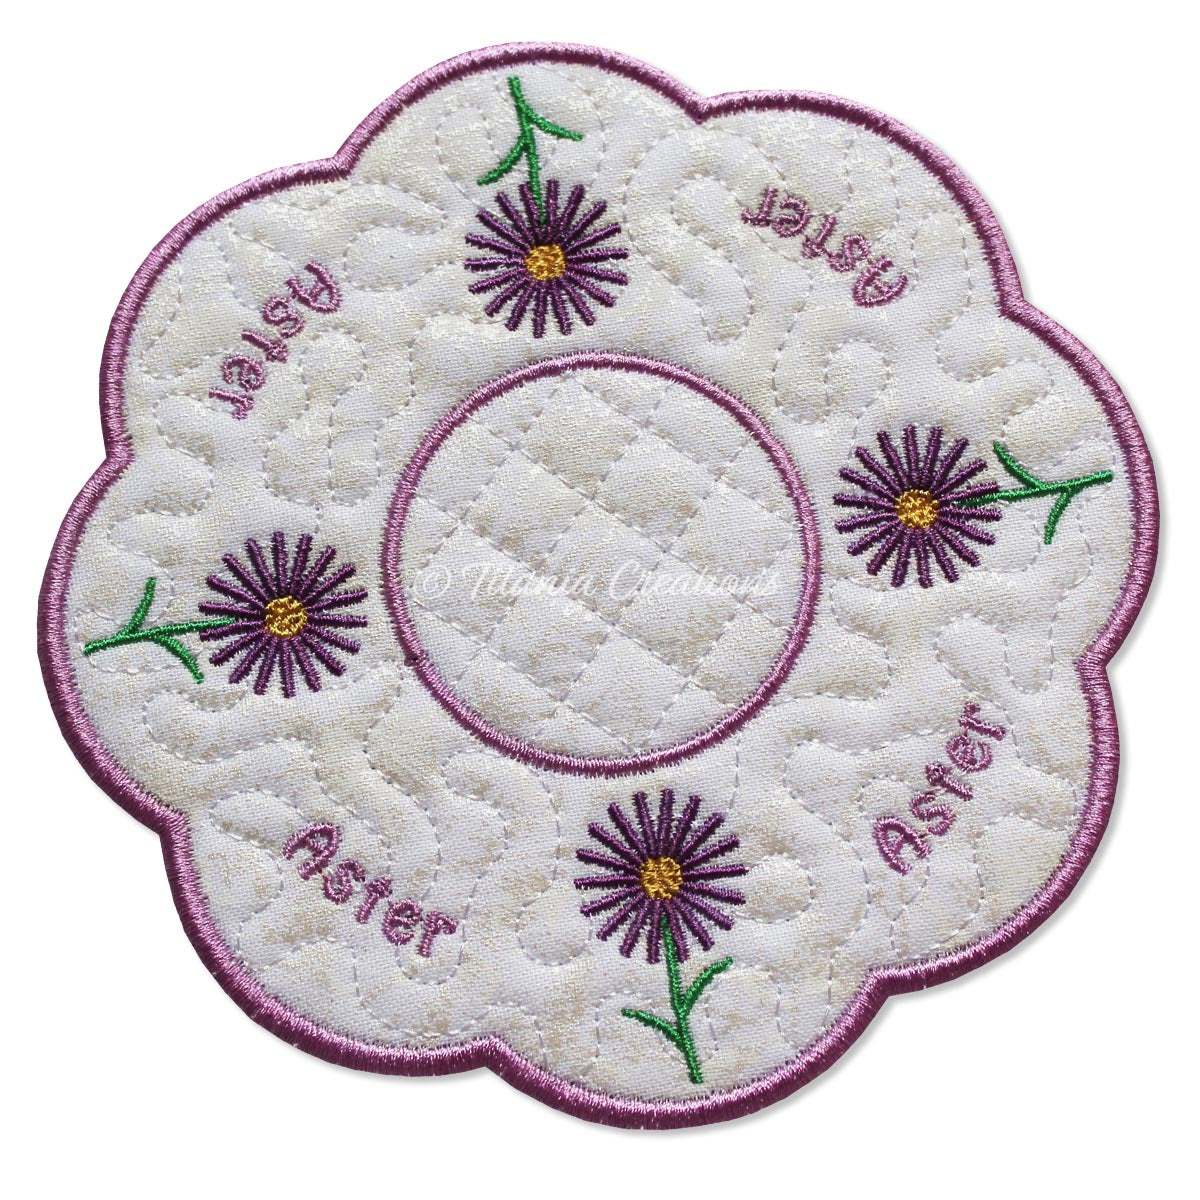 ITH Aster Flower for September Candle Mat 5x5 6x6 7x7 8x8